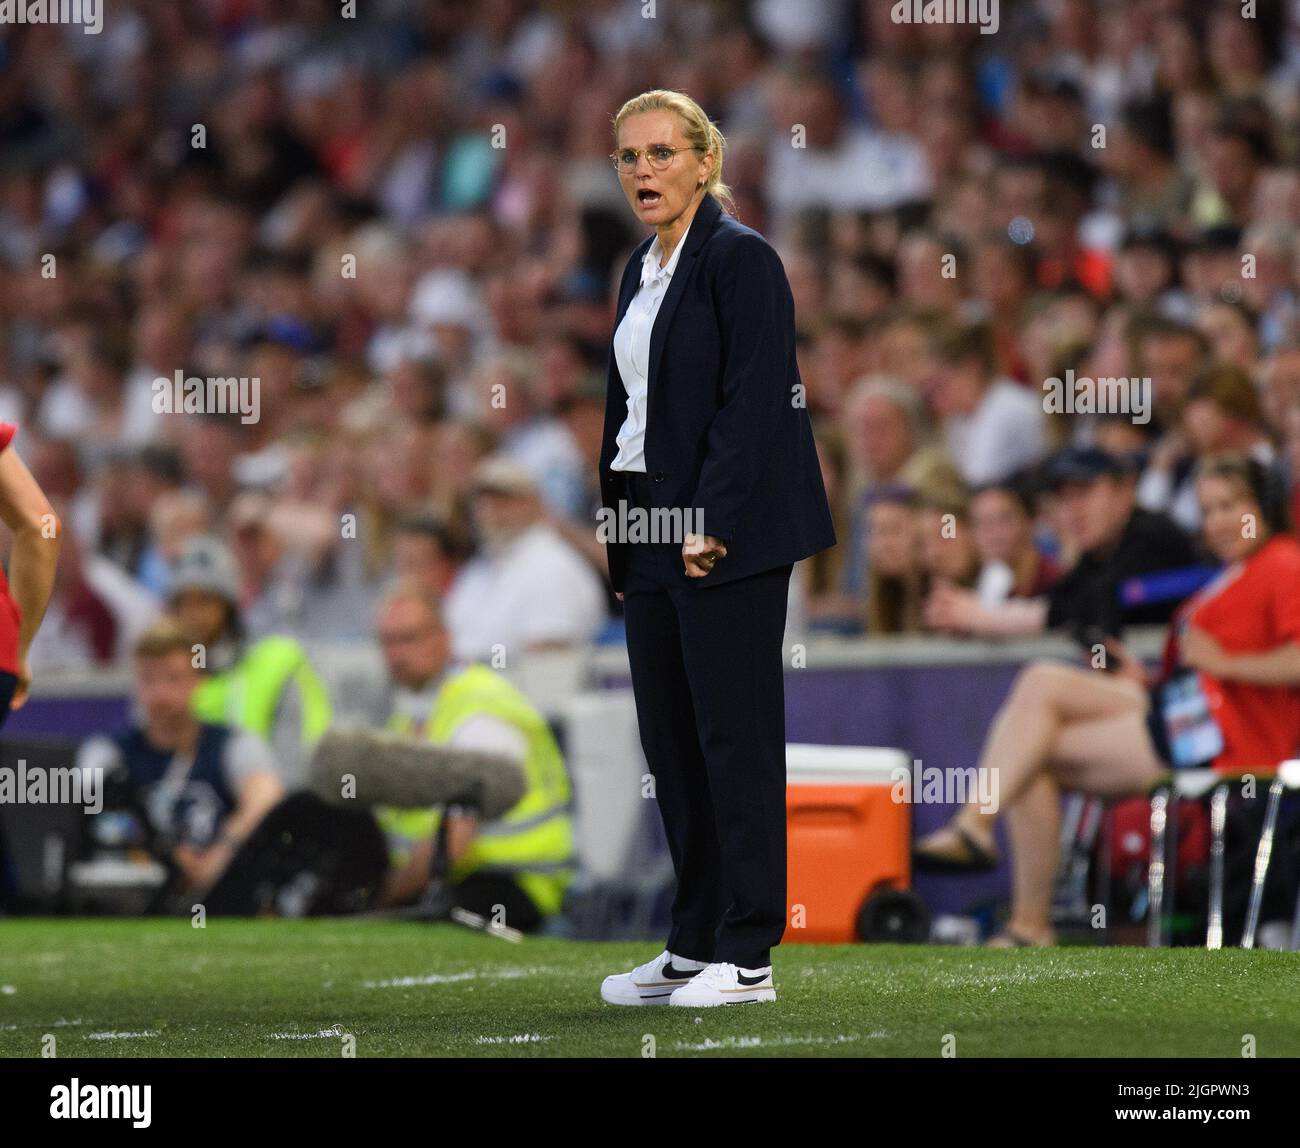 11 Jul 2022 - England v Norway - UEFA Women's Euro 2022 - Group A - Brighton & Hove Community Stadium  England Head Coach Sarina Wiegman during the match against Norway.  Picture Credit : © Mark Pain / Alamy Live News Stock Photo